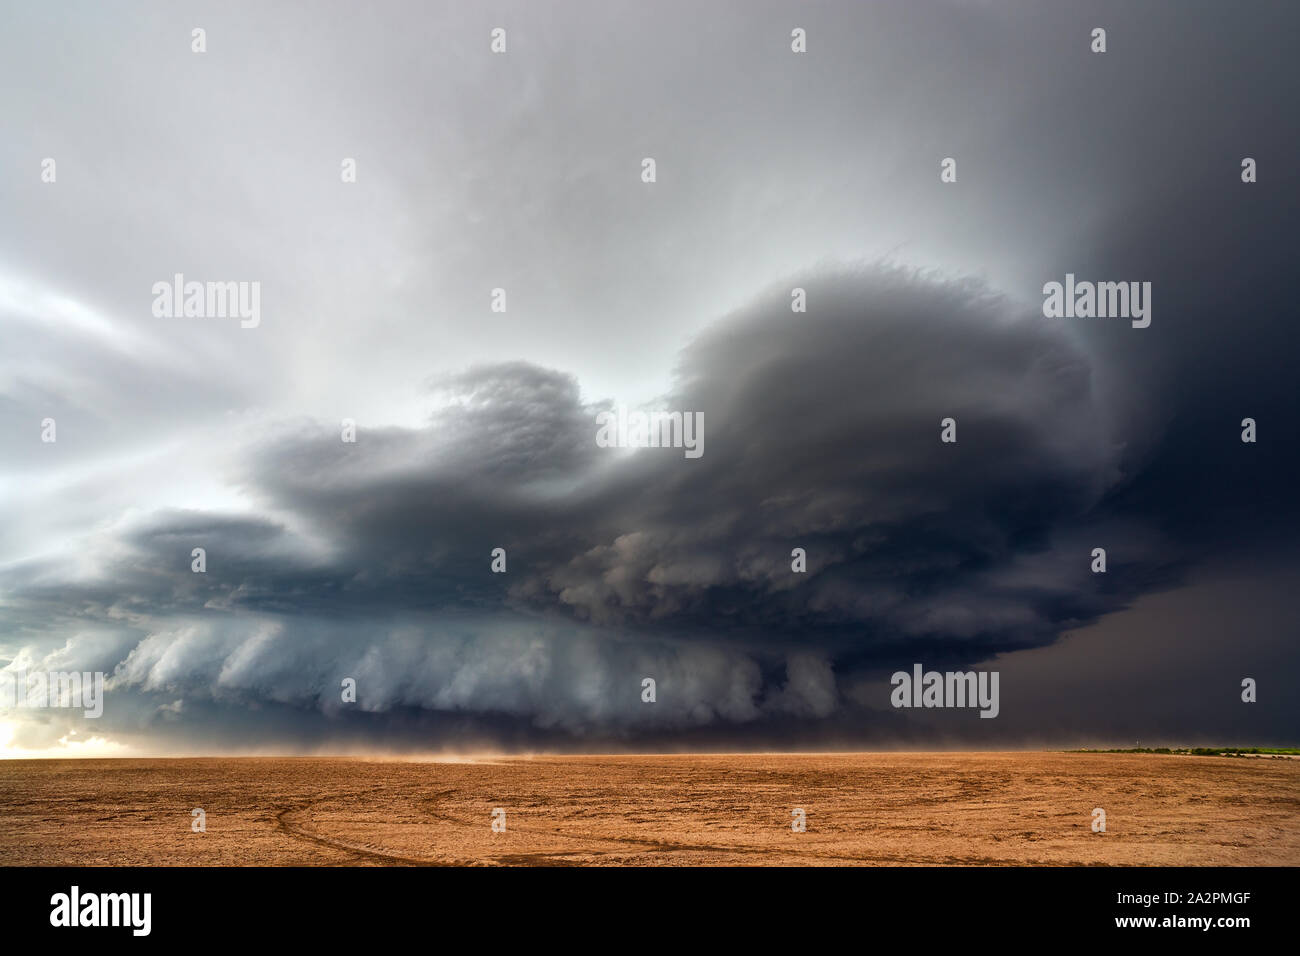 Supercell storm with dramatic clouds over a dusty field near Bethune, Colorado Stock Photo